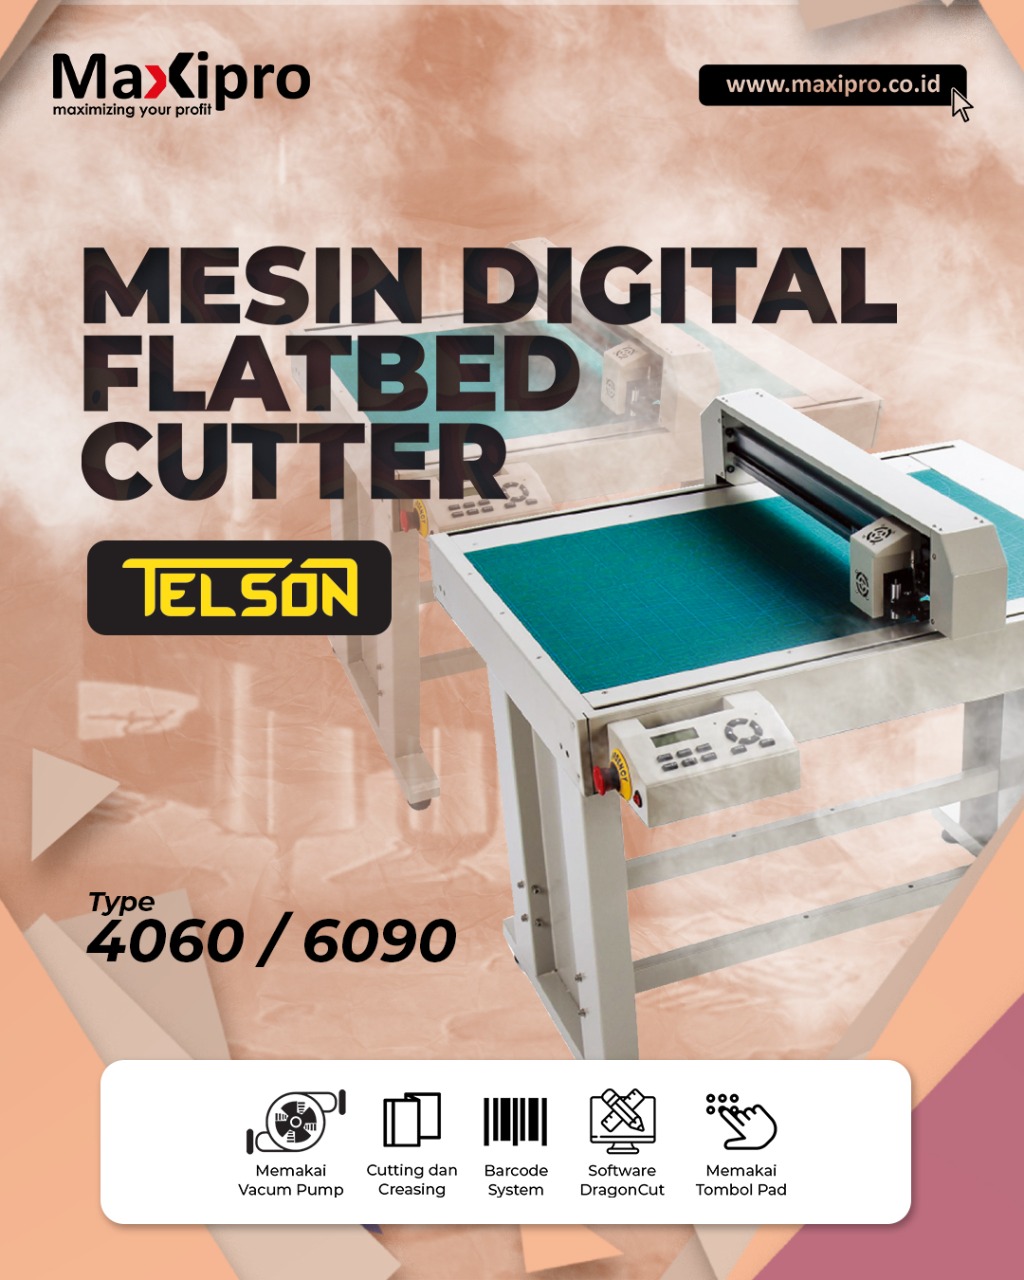 slider mesin flatbed cutter telson maxipro